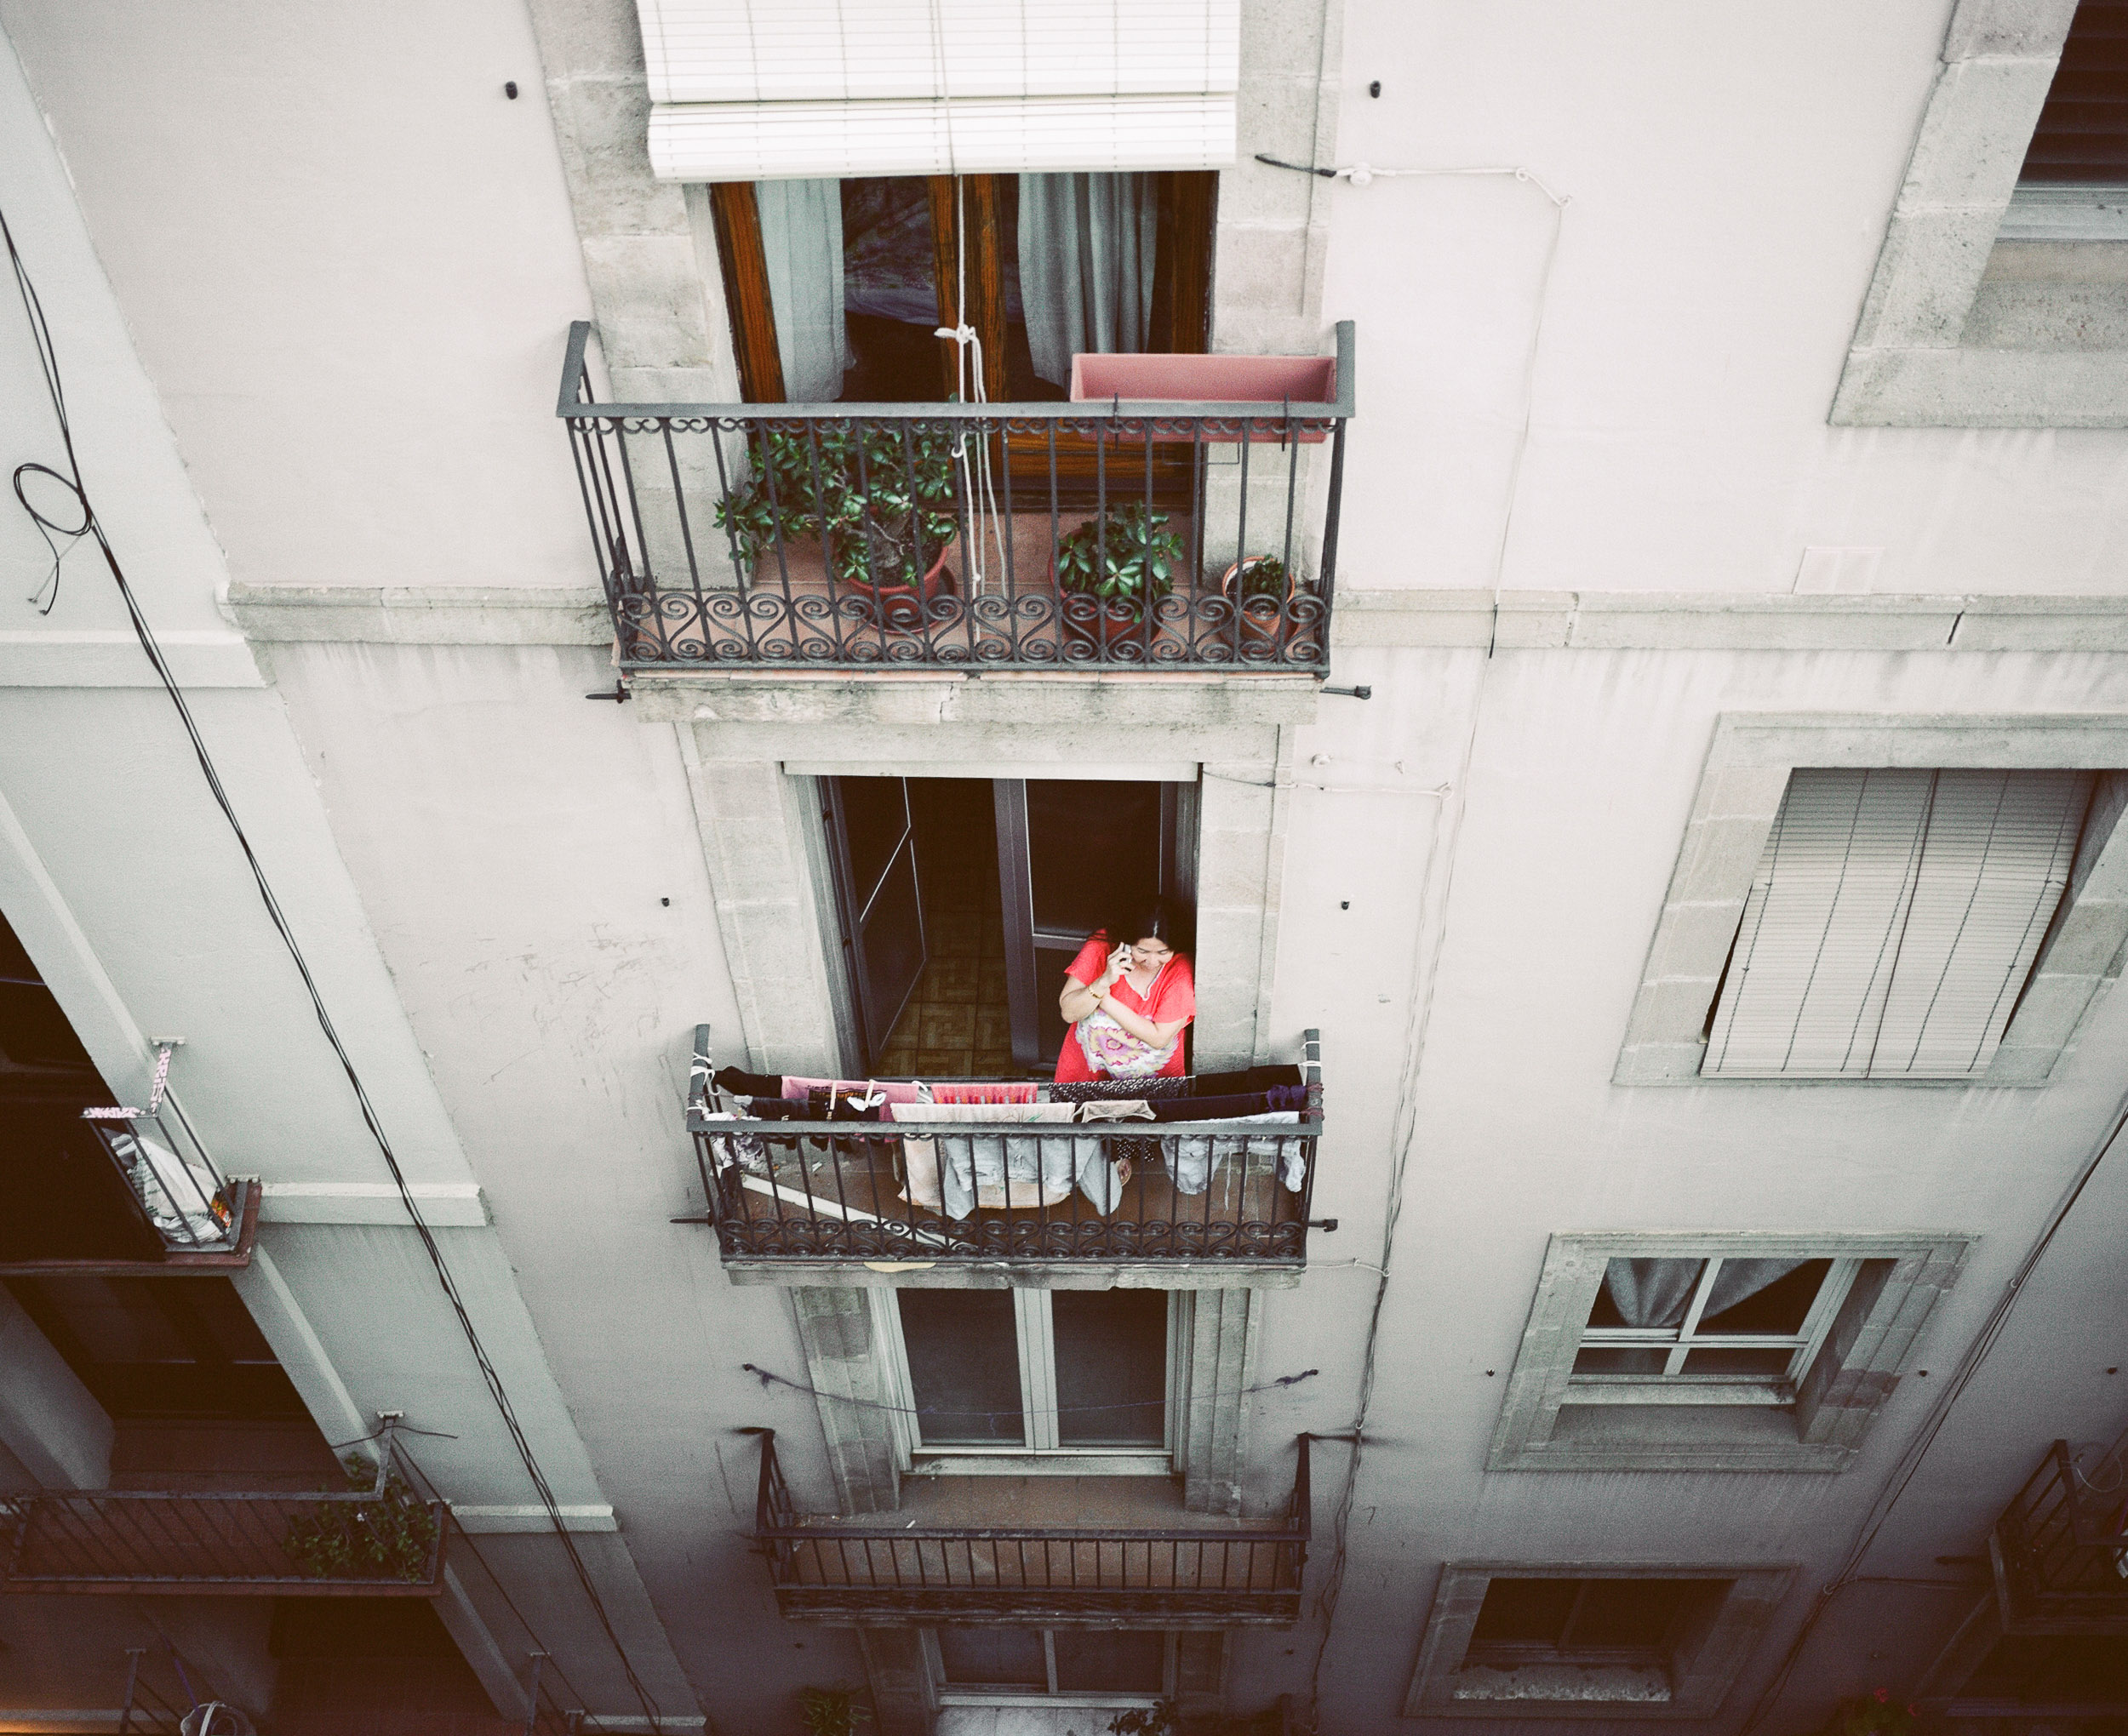 Woman on the phone standing on a balcony in Barcelona, Spain